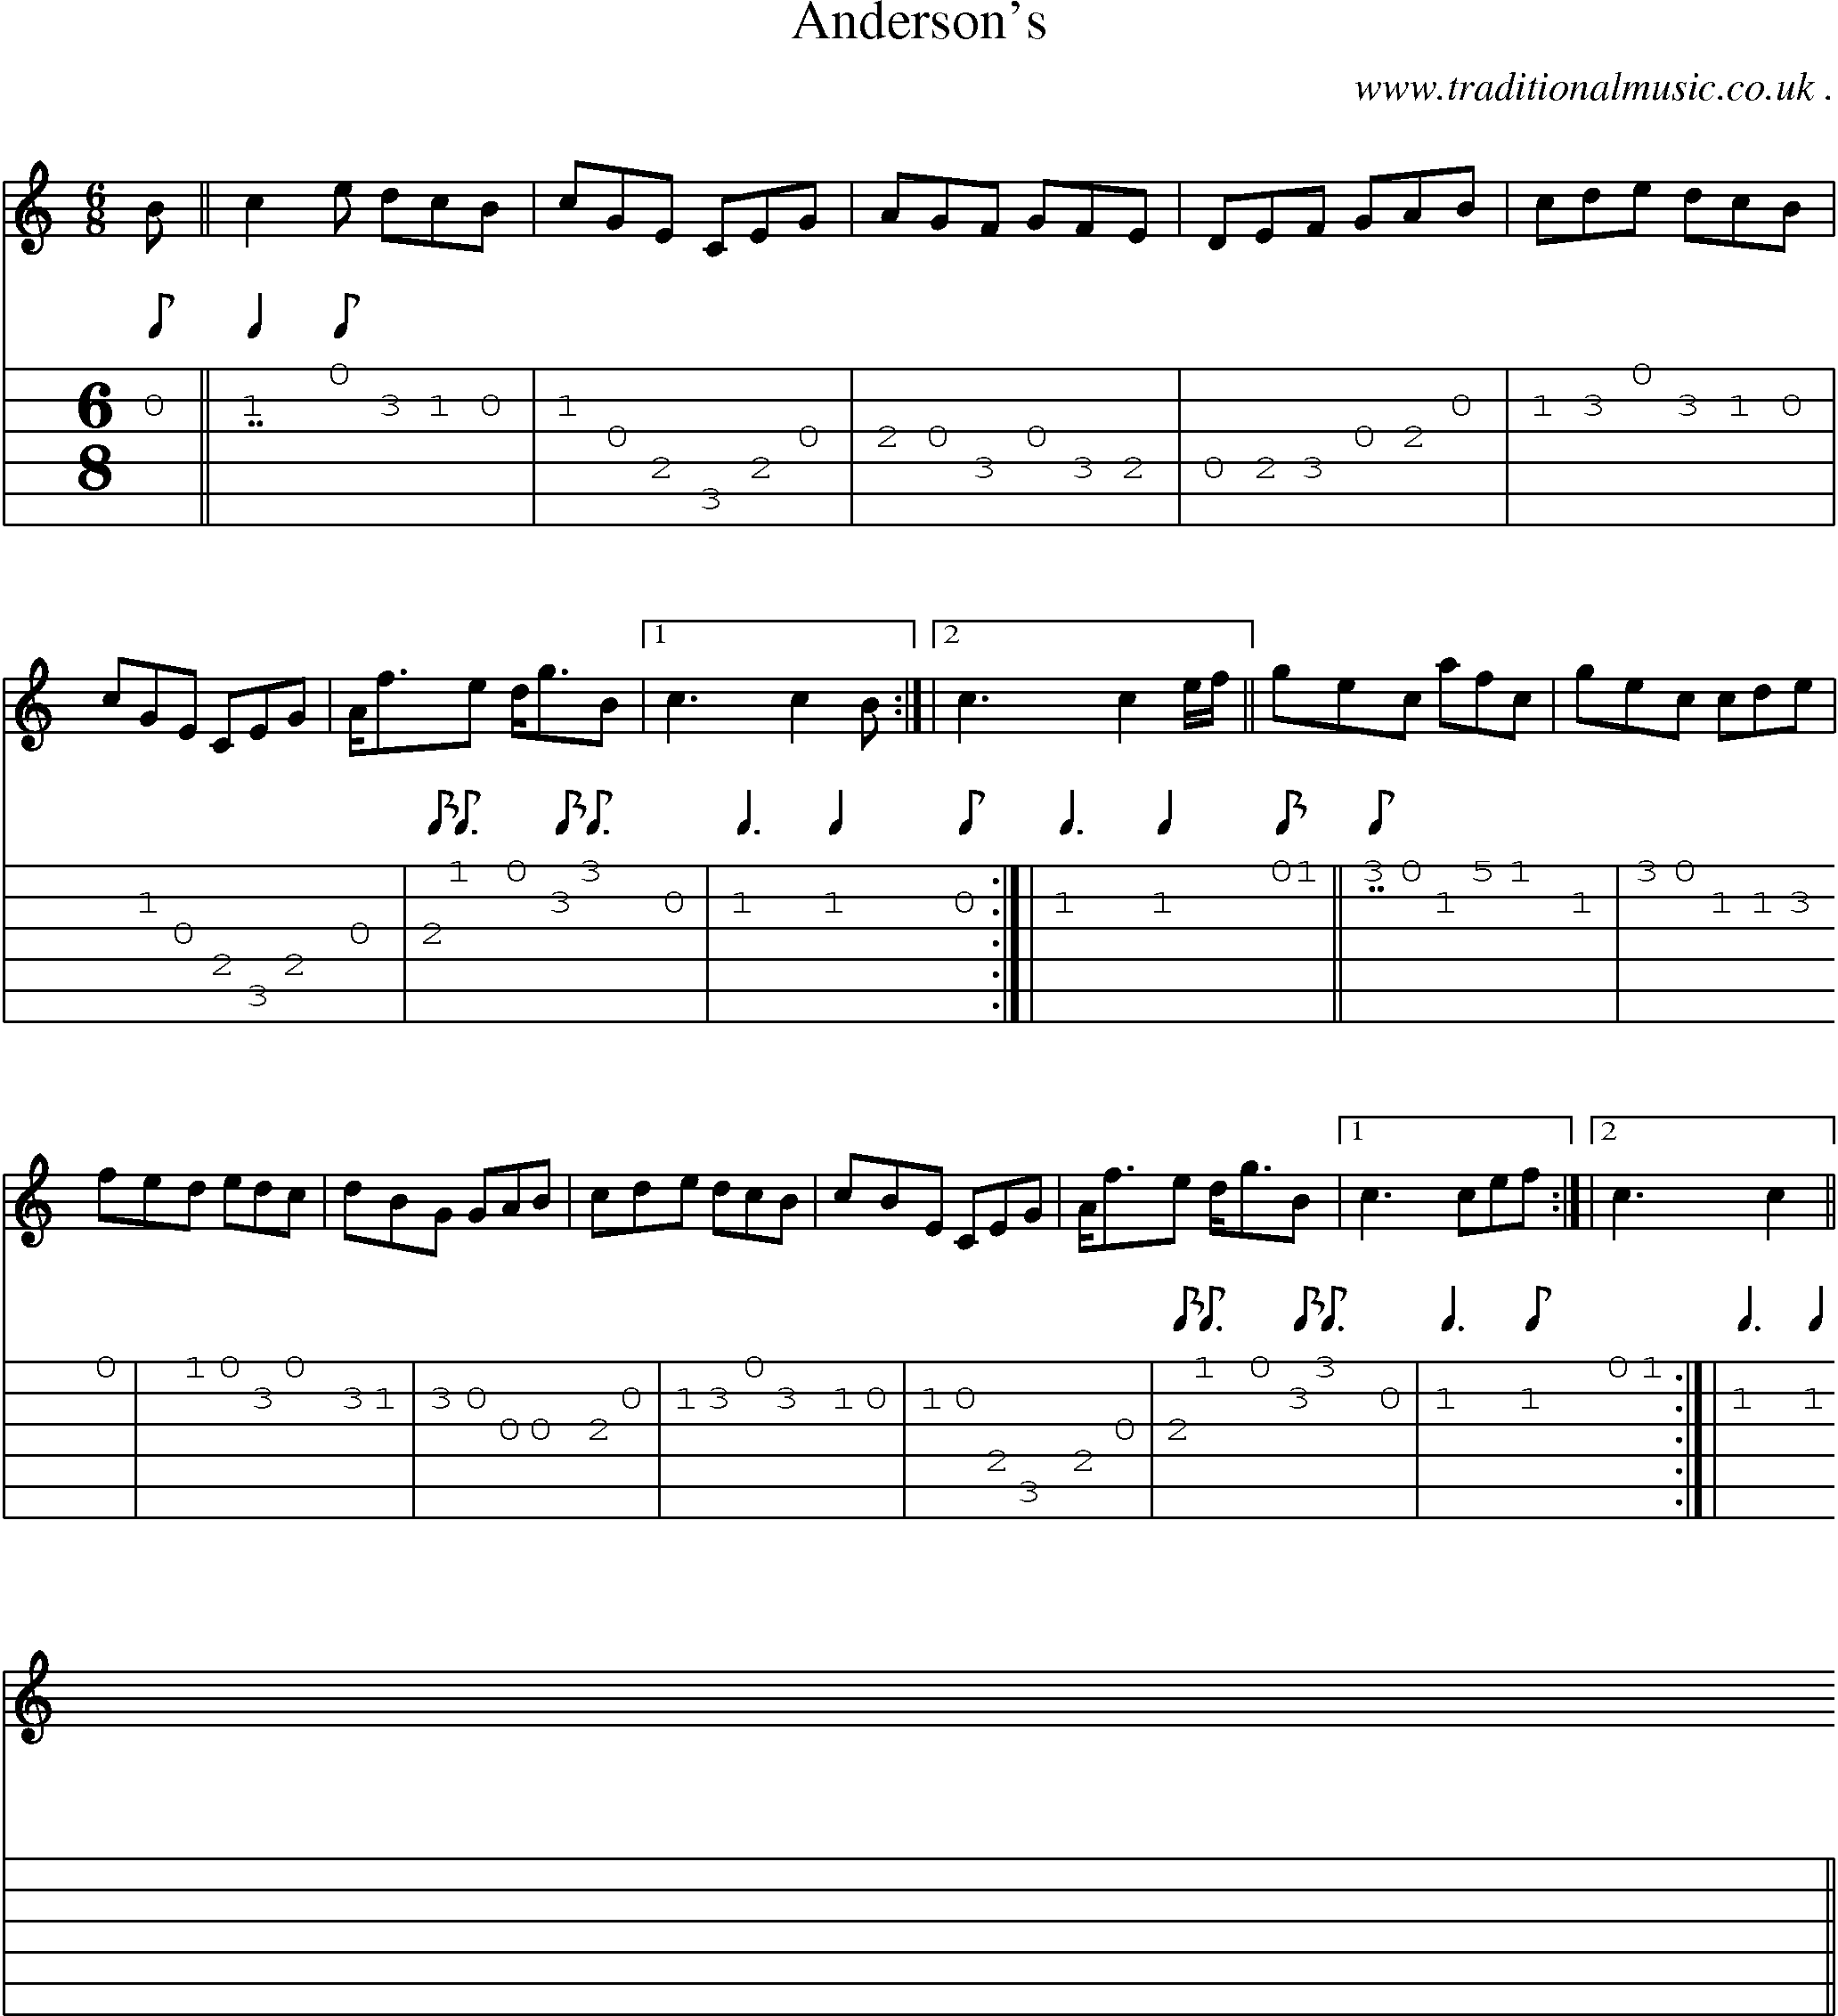 Sheet-music  score, Chords and Guitar Tabs for Andersons